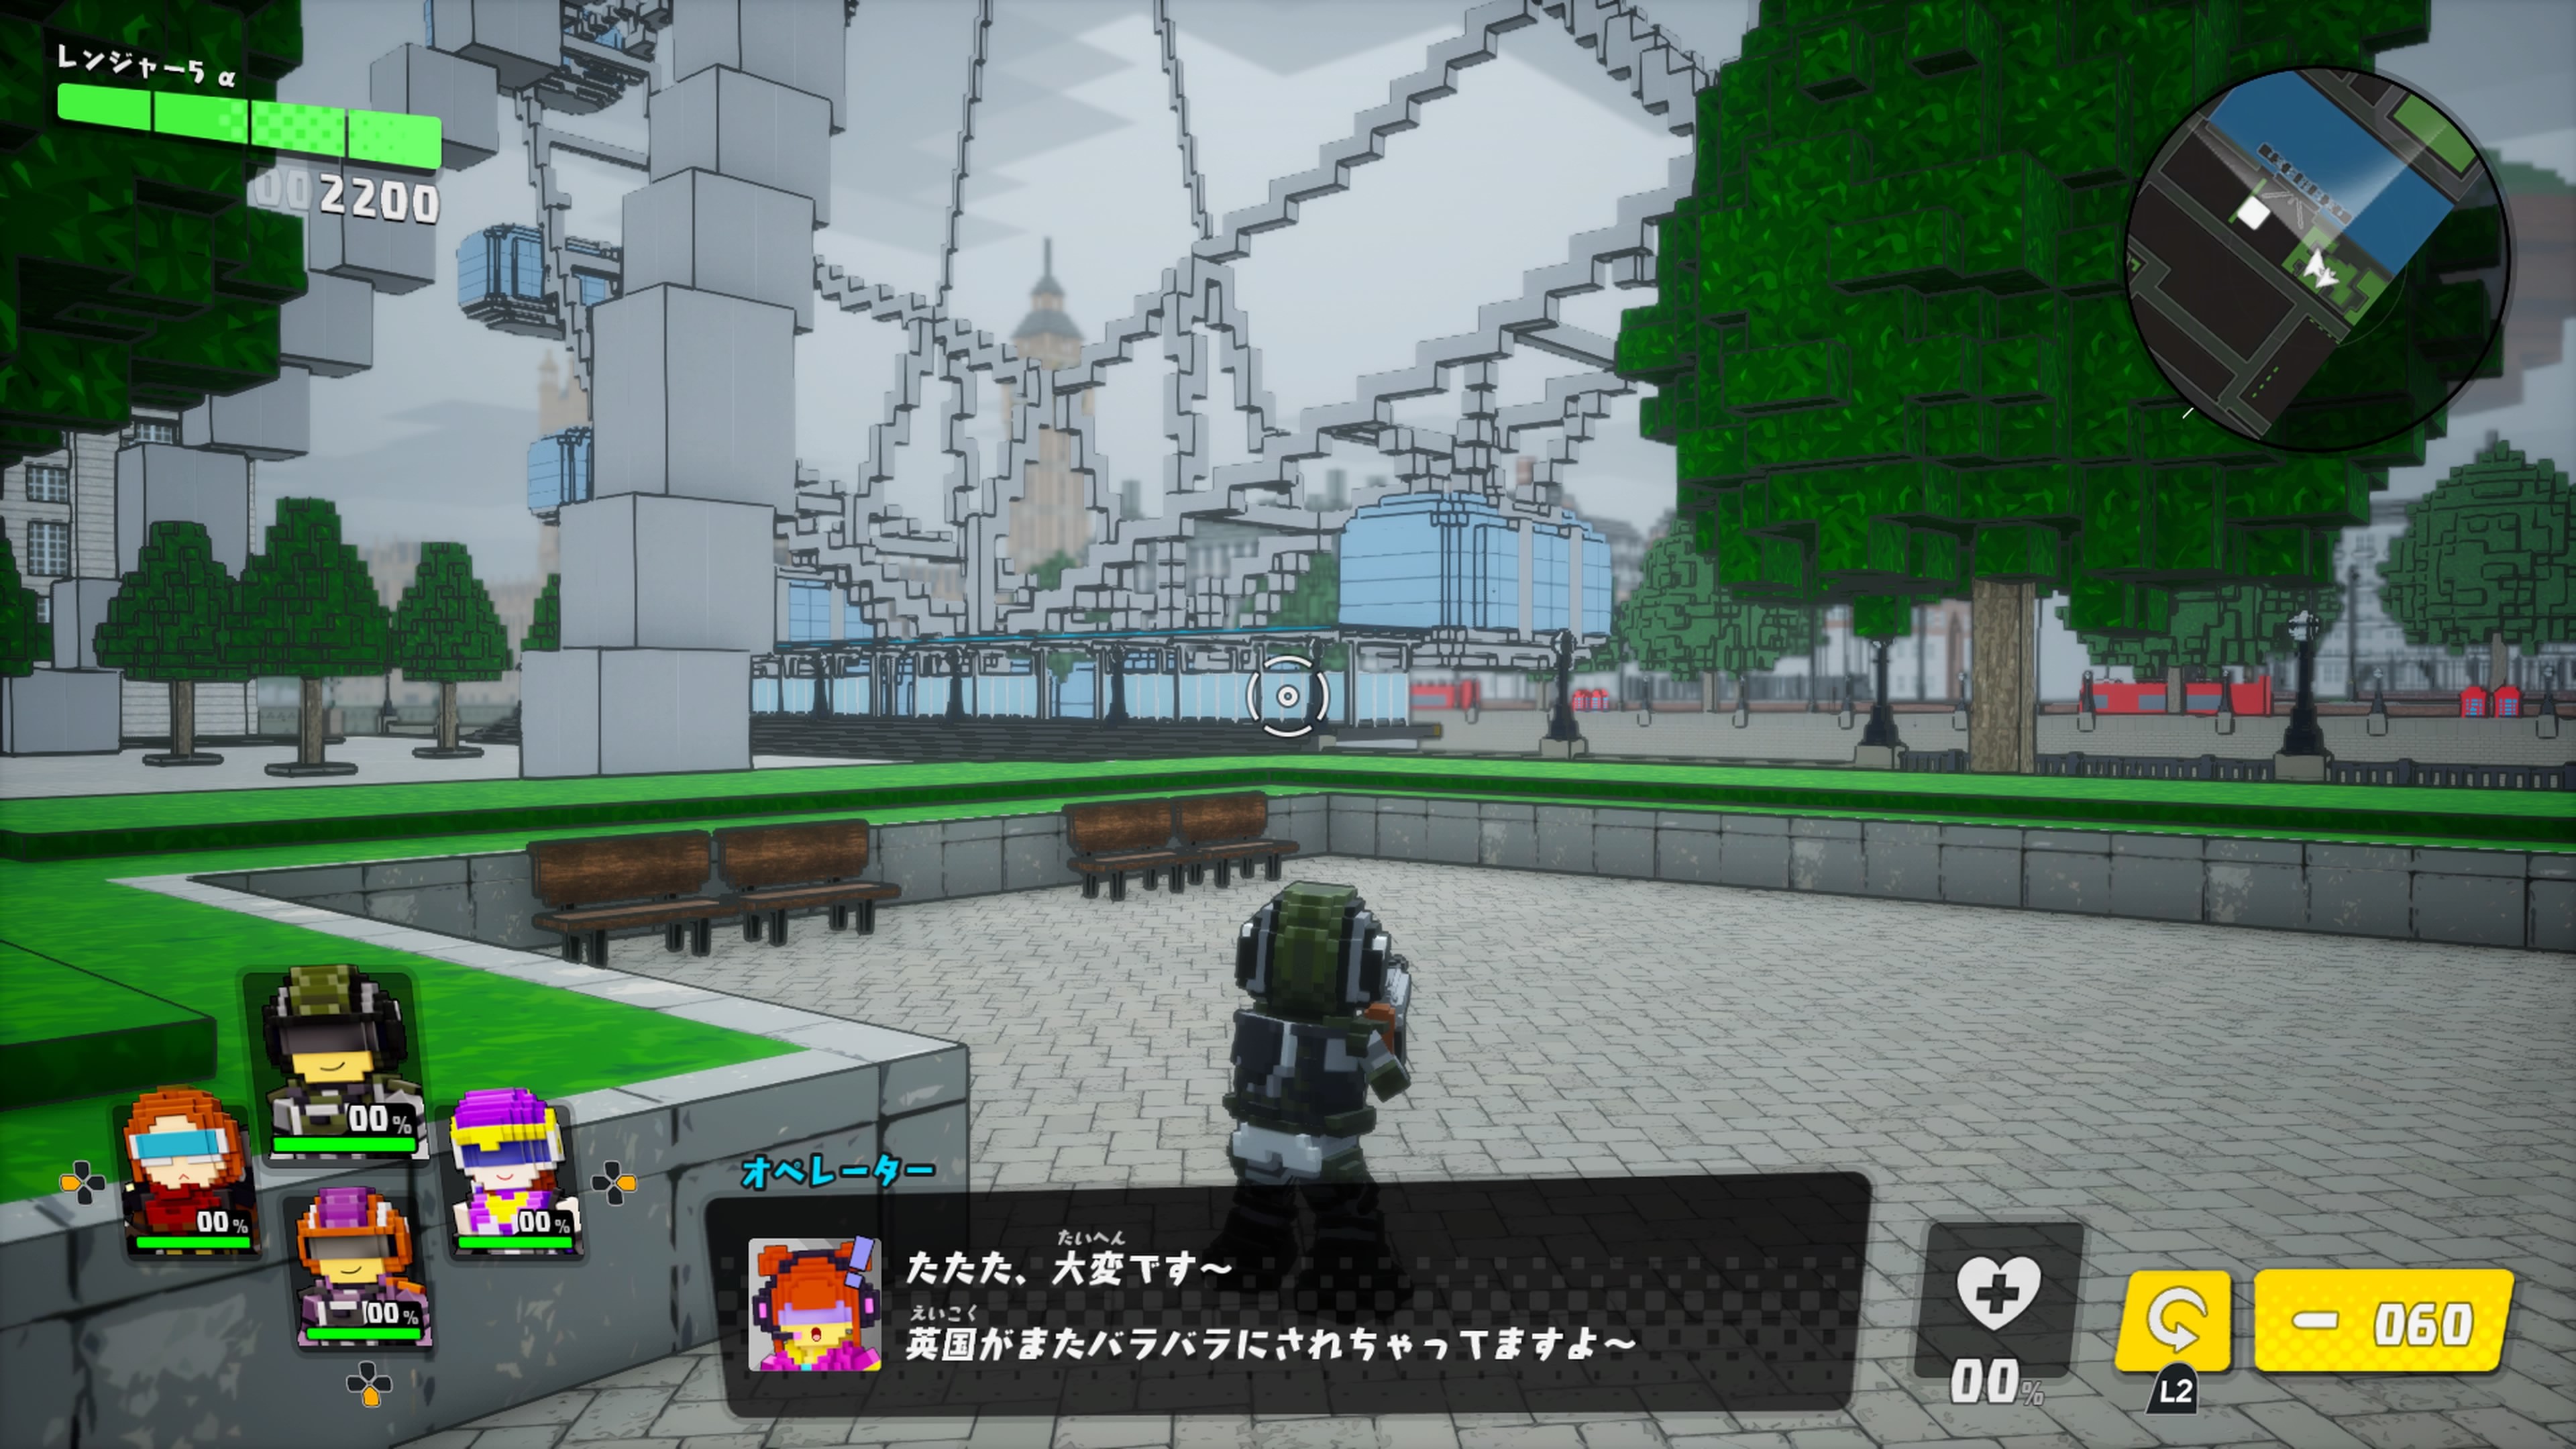 EARTH DEFENSE FORCE: WORLD BROTHERS - Additional Mission Pack: Another ResCUBE screenshot